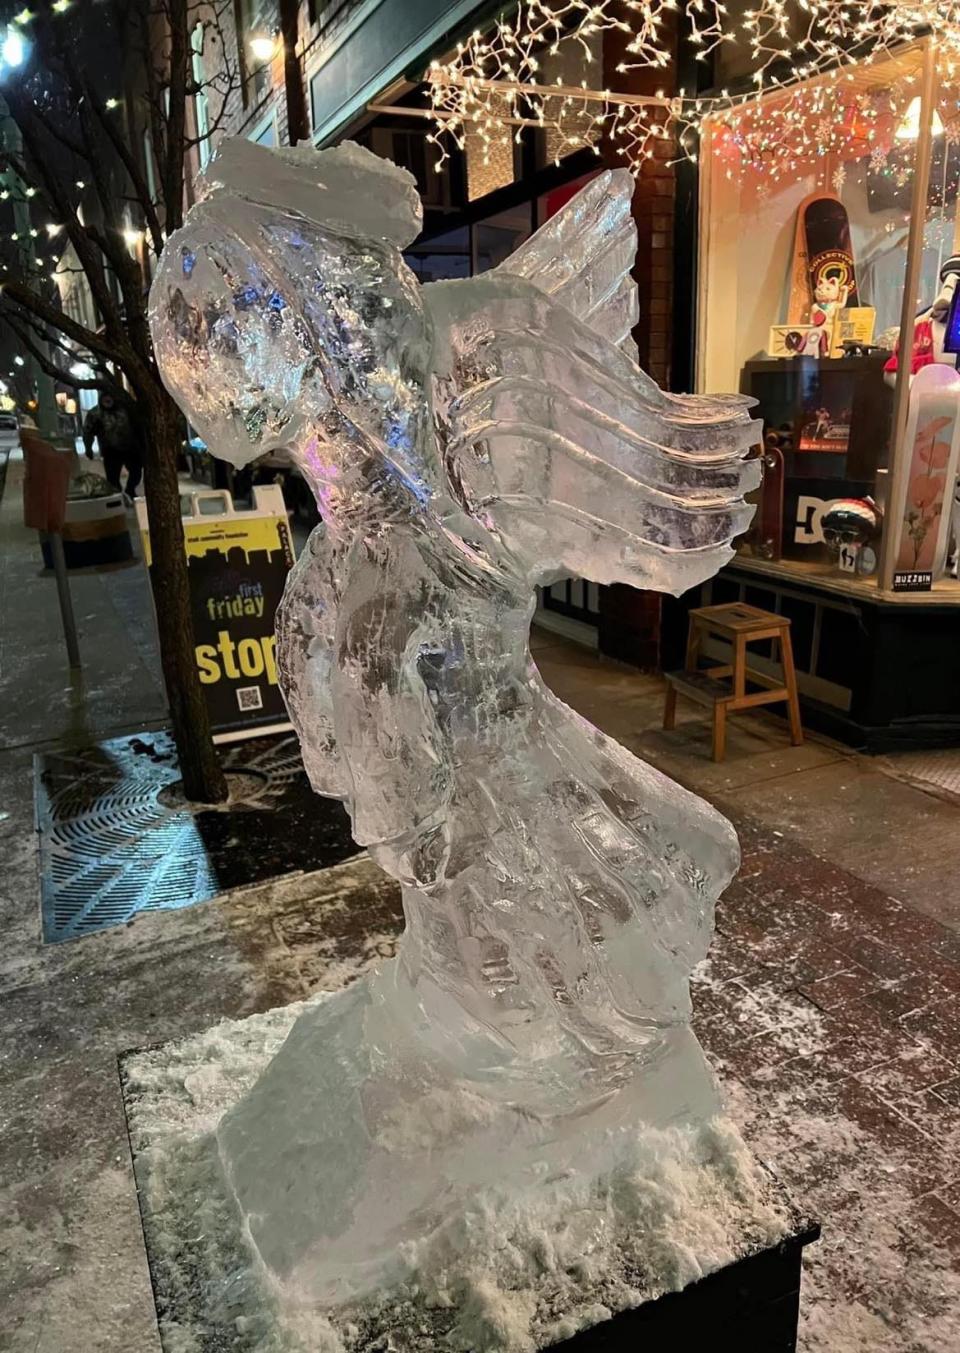 Ice sculpting has become a tradition for Canton First Friday in January. This week's event features ice sculpting demonstrations at 20 locations.